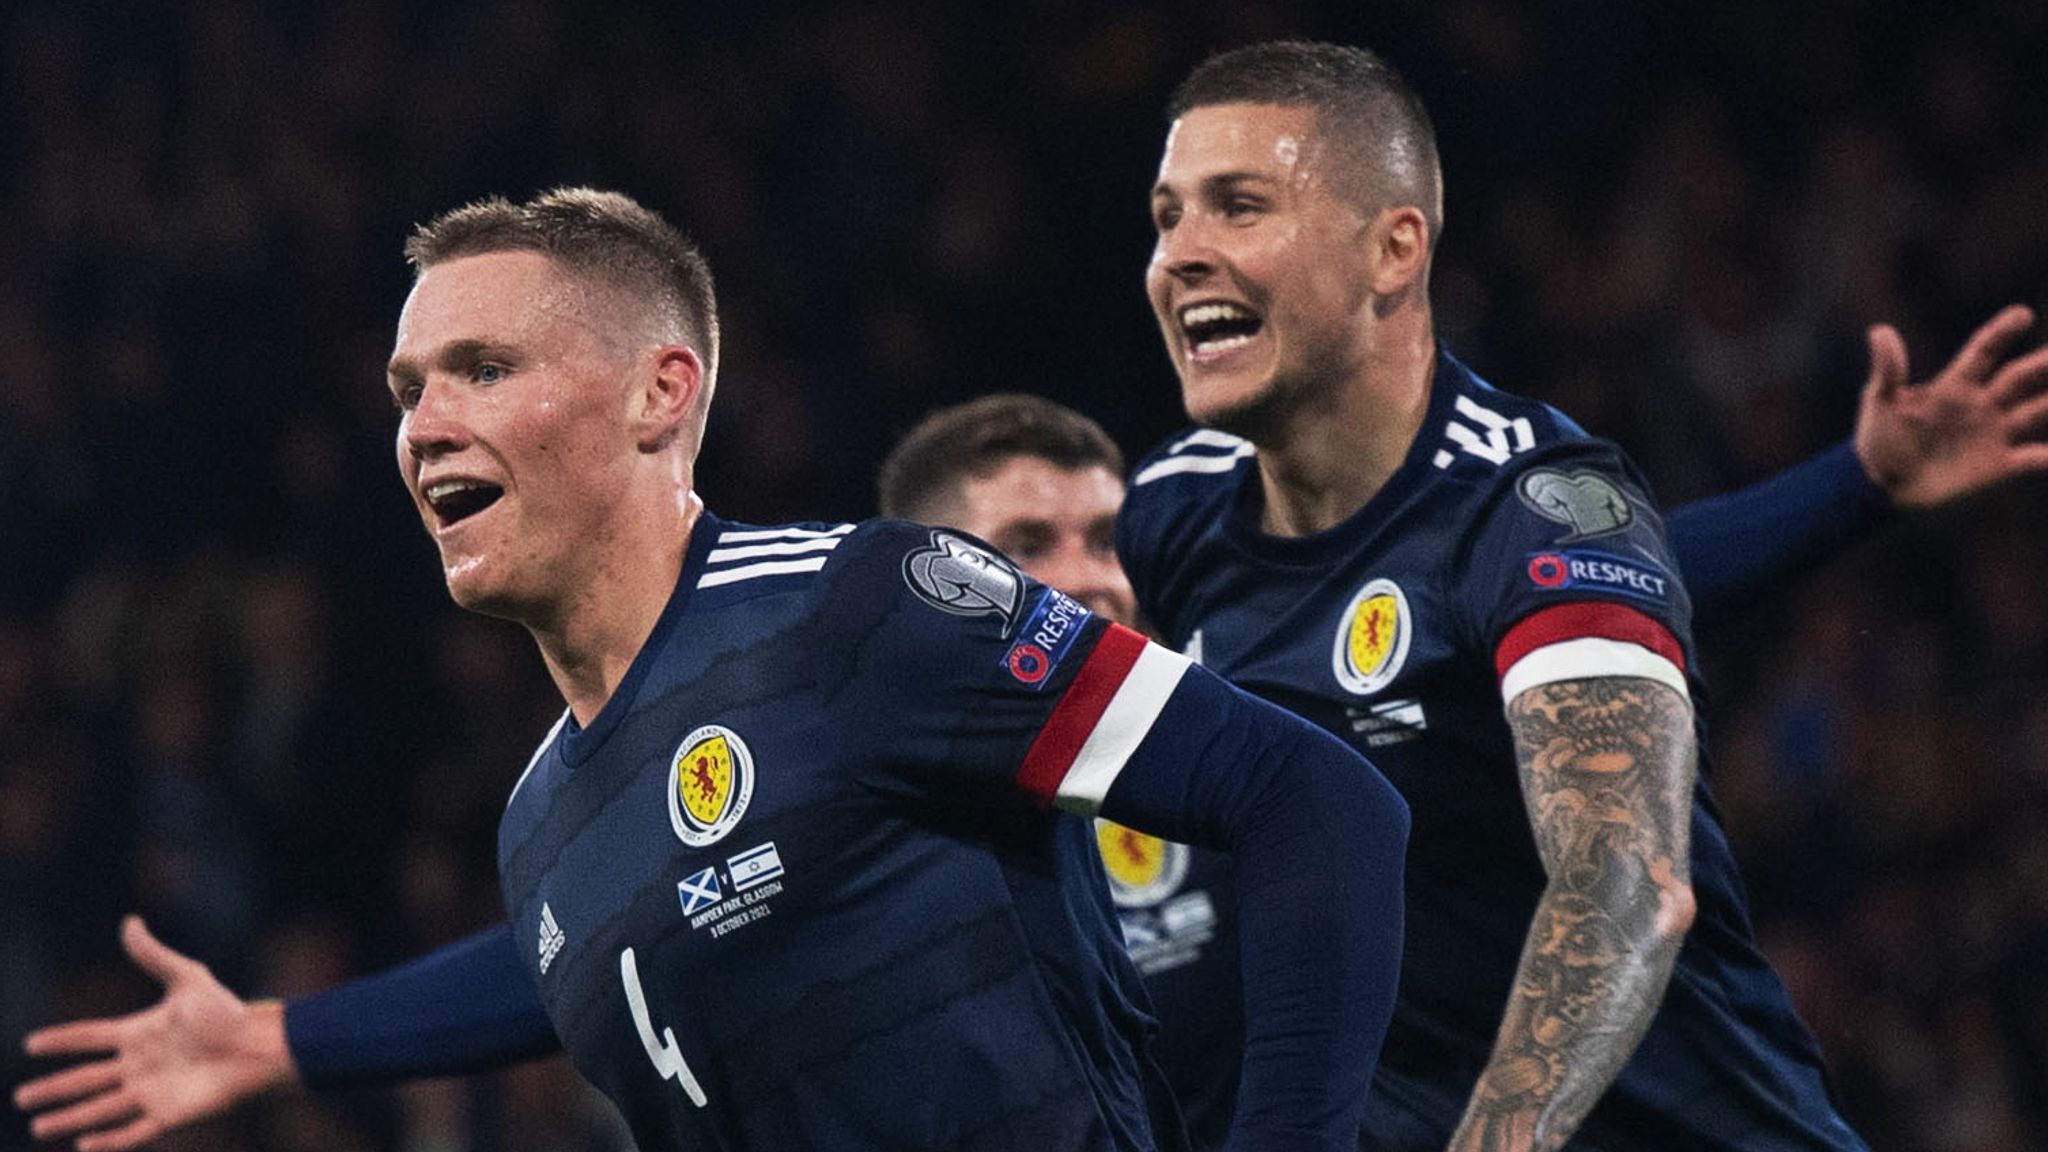 Israel officially out of 2022 World Cup as Scotland secures 2nd